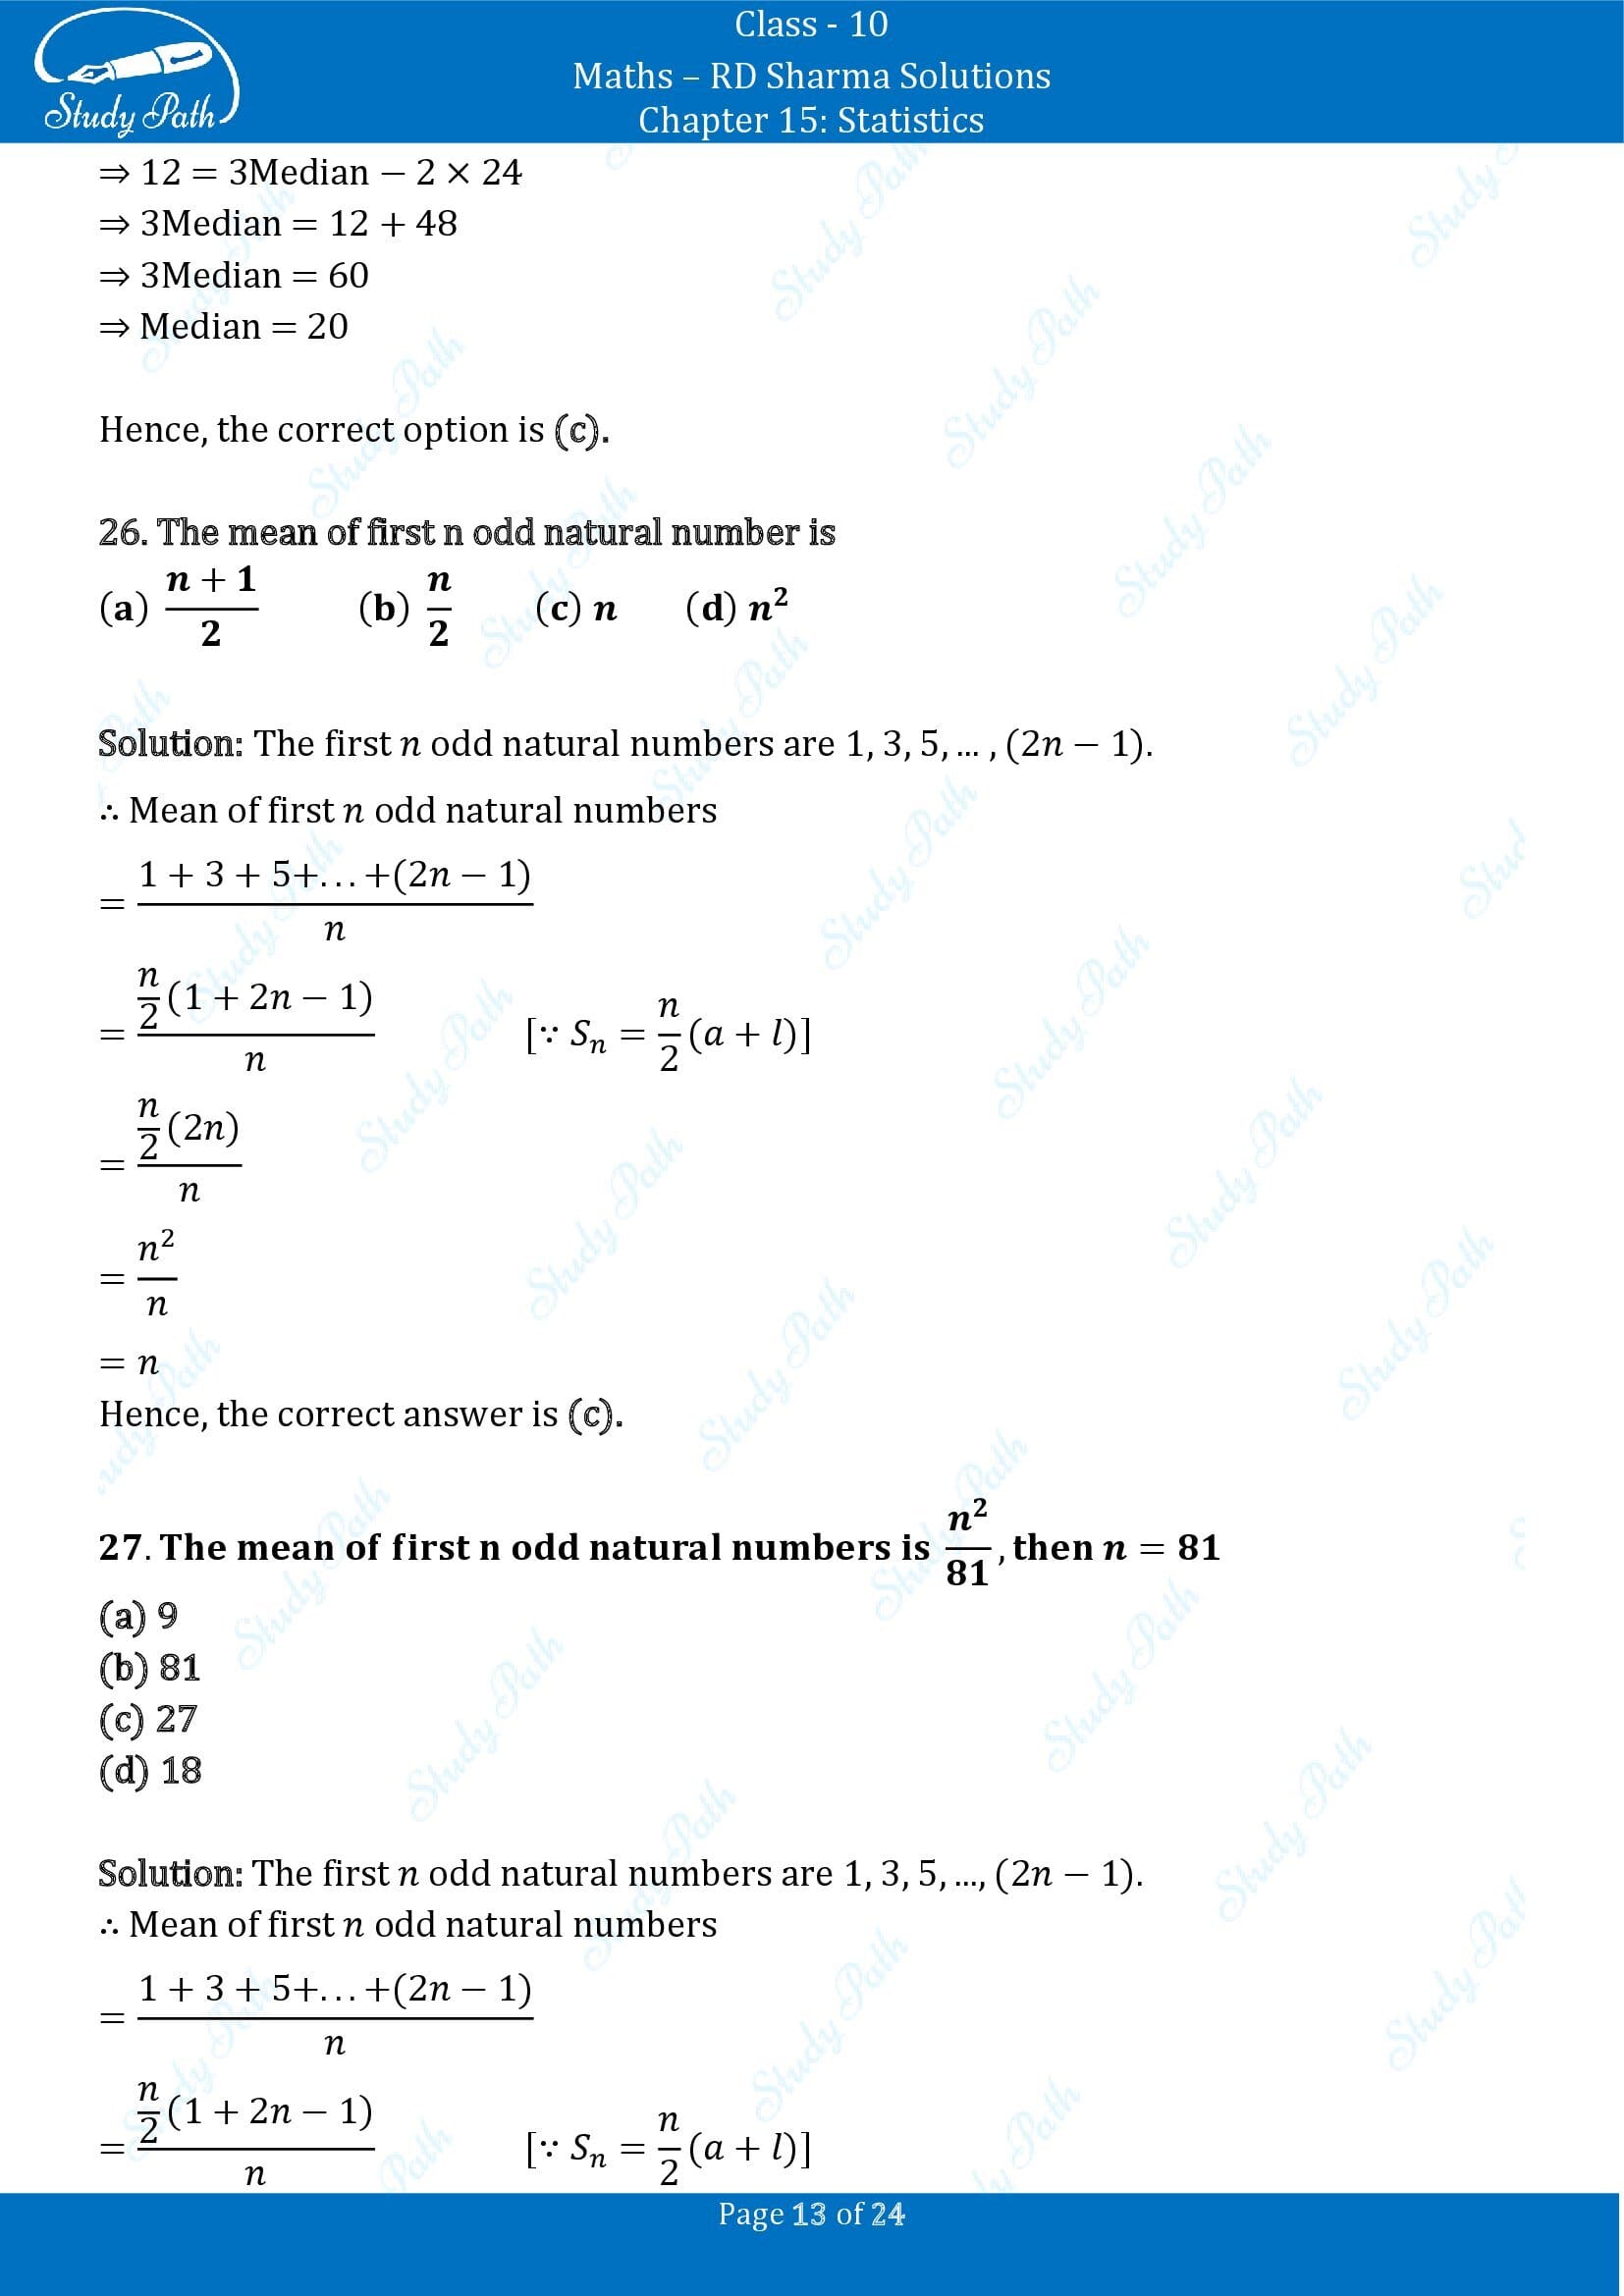 RD Sharma Solutions Class 10 Chapter 15 Statistics Multiple Choice Question MCQs 00013